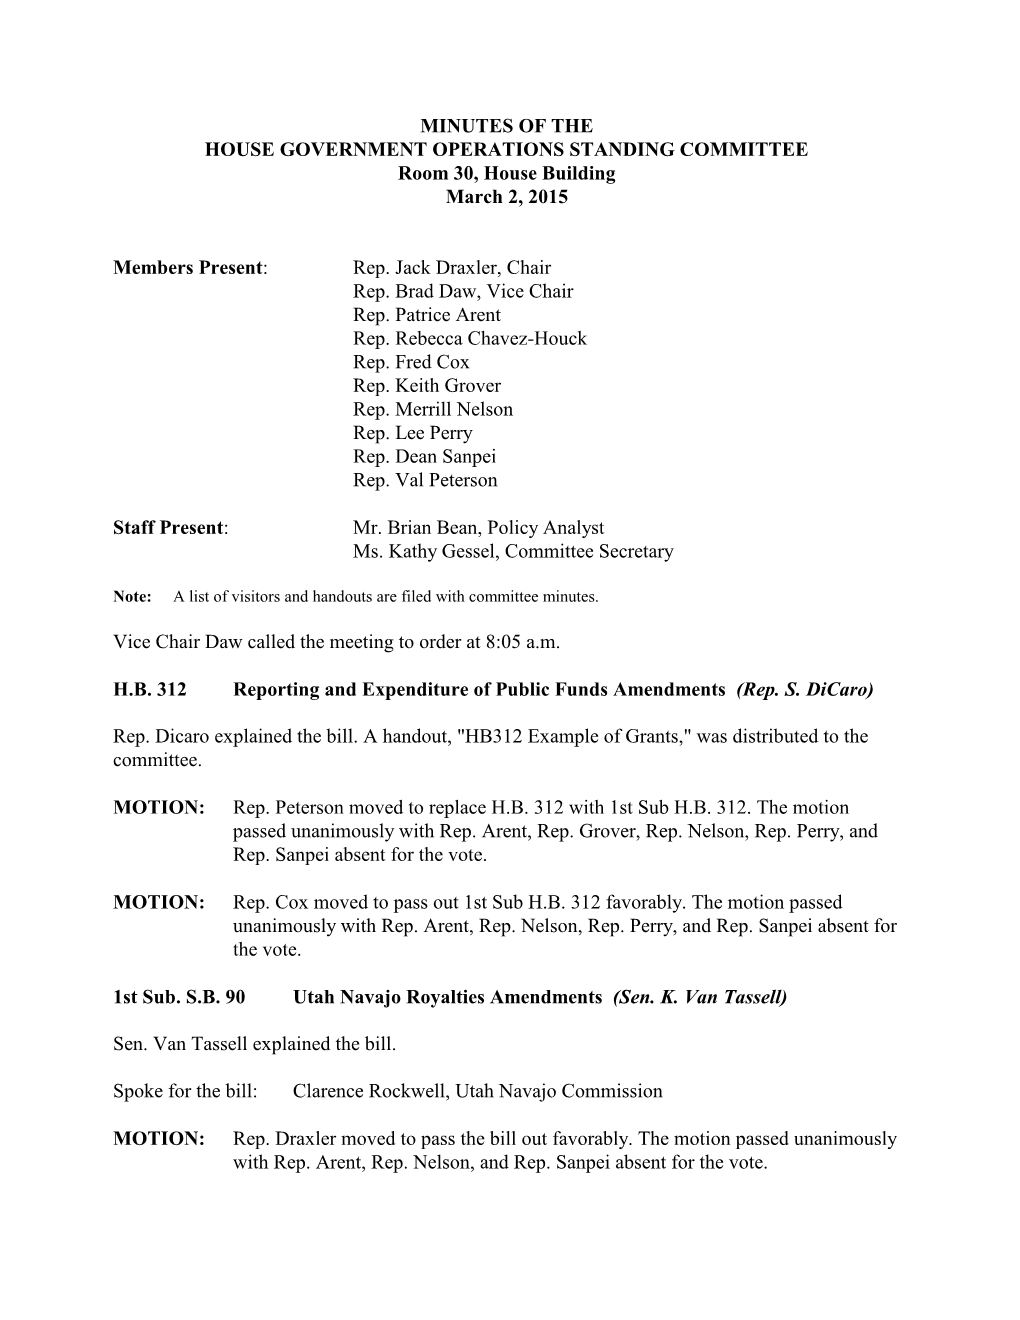 MINUTES of the HOUSE GOVERNMENT OPERATIONS STANDING COMMITTEE Room 30, House Building March 2, 2015